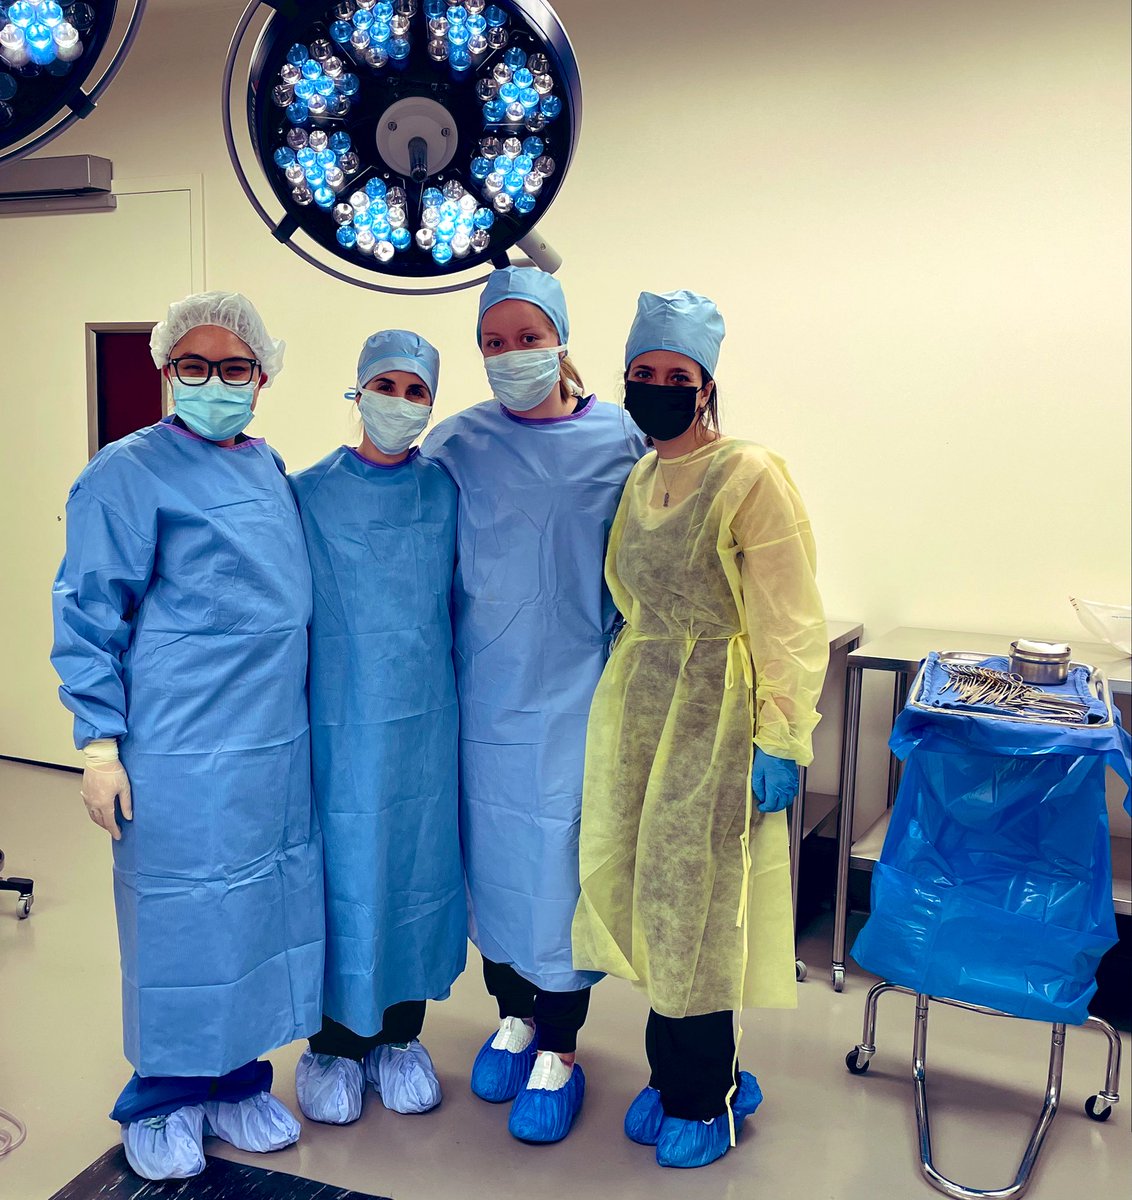 Scrubbed into one of my last @MauckLab surgeries today with a strong 💪🏻 group of women across vet med (@NatalieFogart13), ortho surg (Kendall Masada), and engineering (@SereenSAssi1) 🤩 #orthotwitter @PerryInitiative